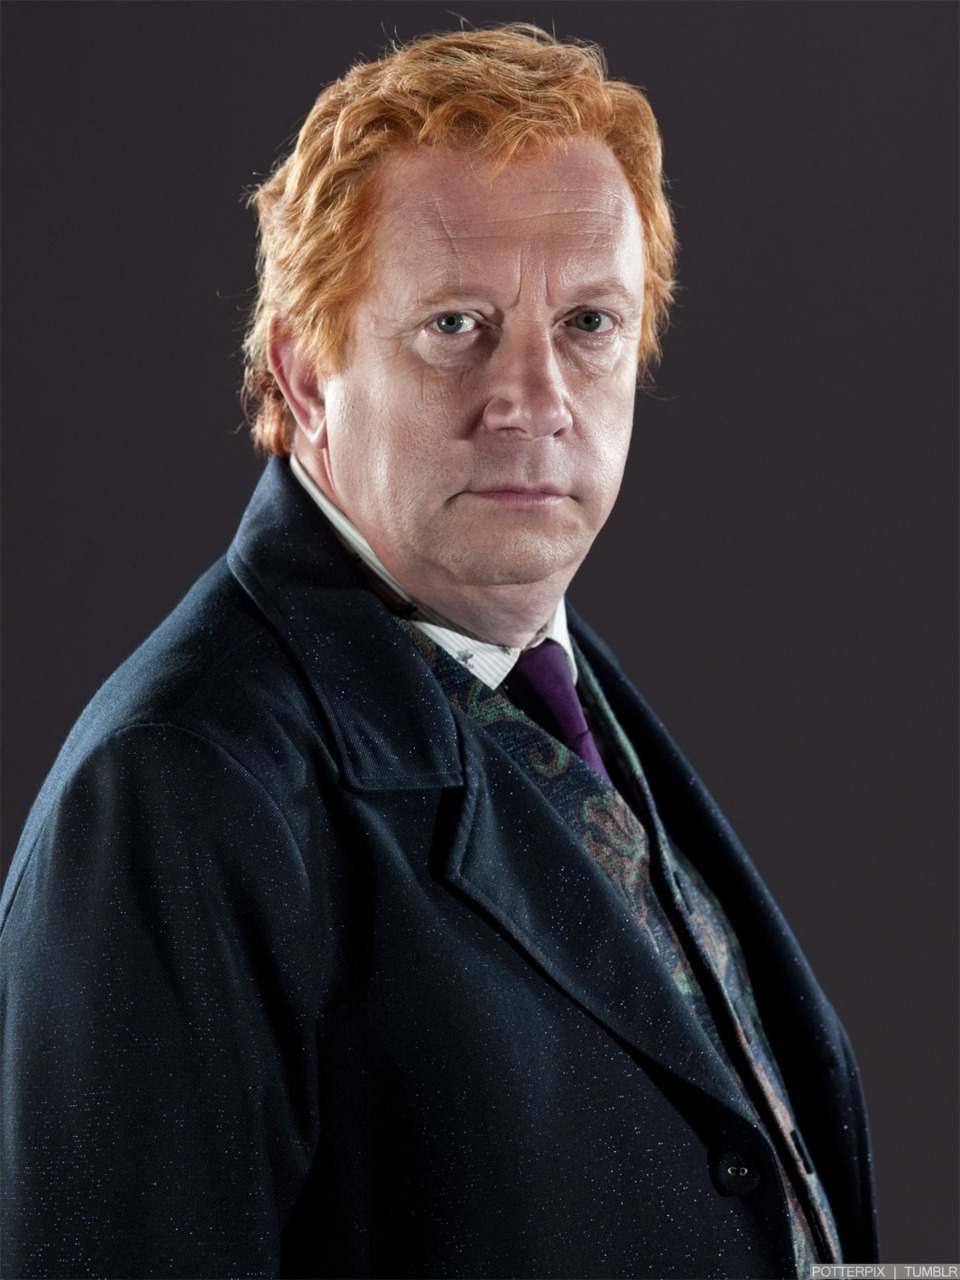 What is the name of the actor who portrayed Molly Weasley's father?